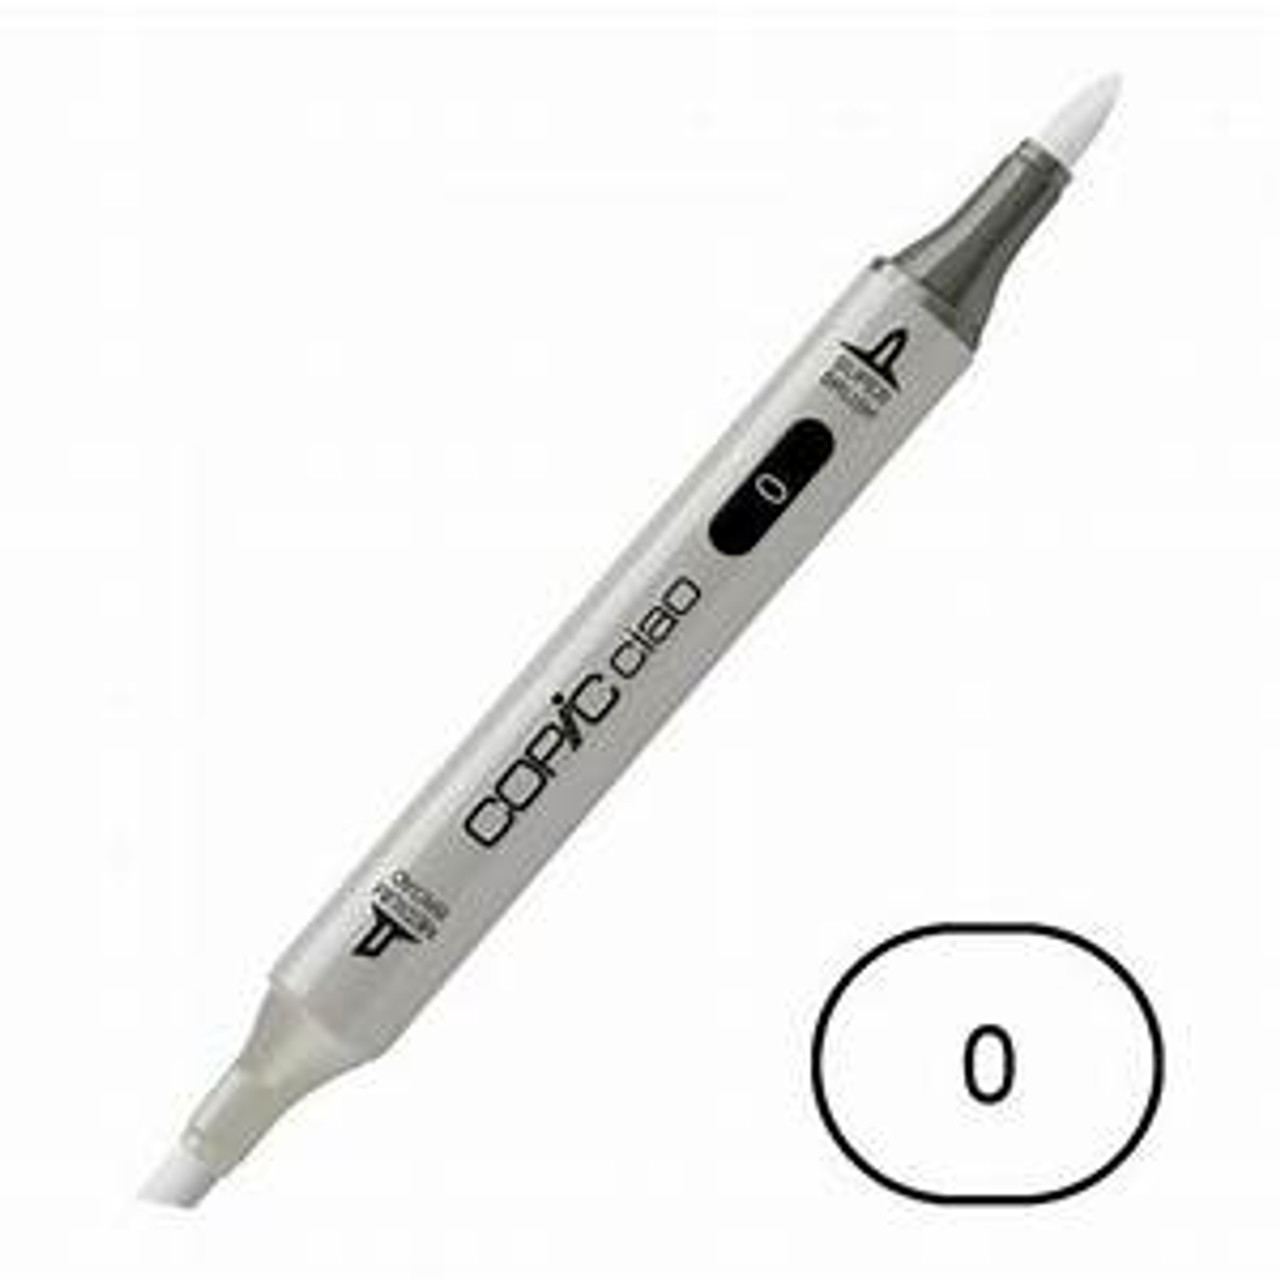 Copic Ciao Colorless Blender Pen (0) - Riley & Company